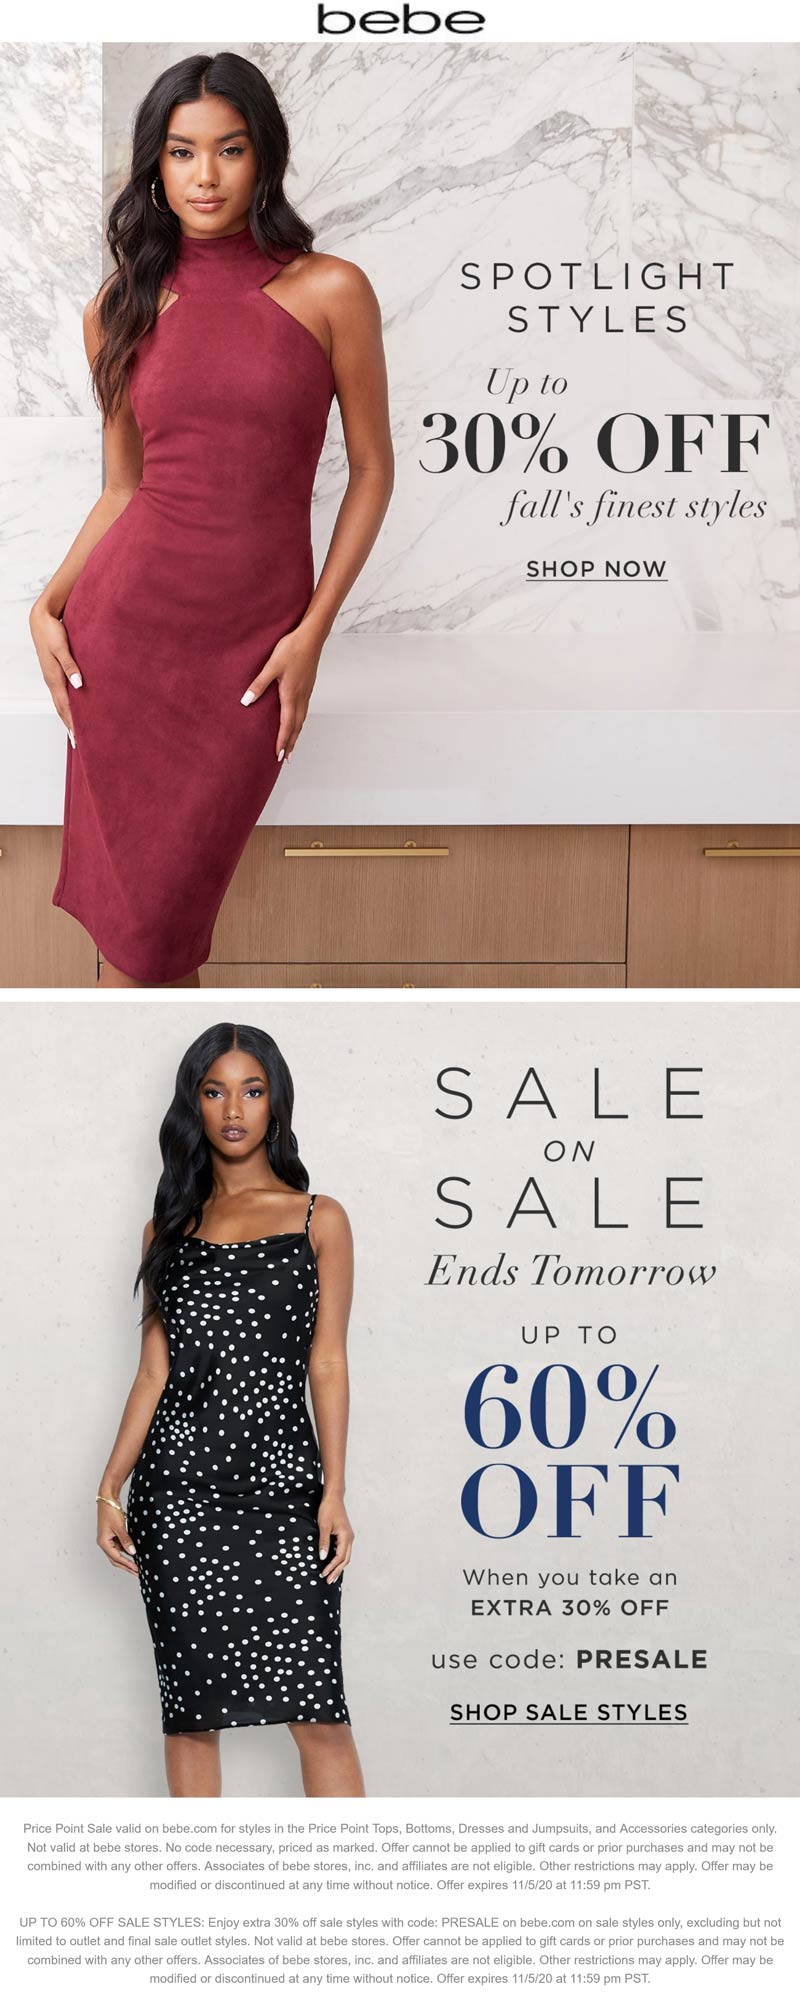 bebe stores Coupon  30-60% off Fall styles & more at bebe, or online via promo code PRESALE #bebe 